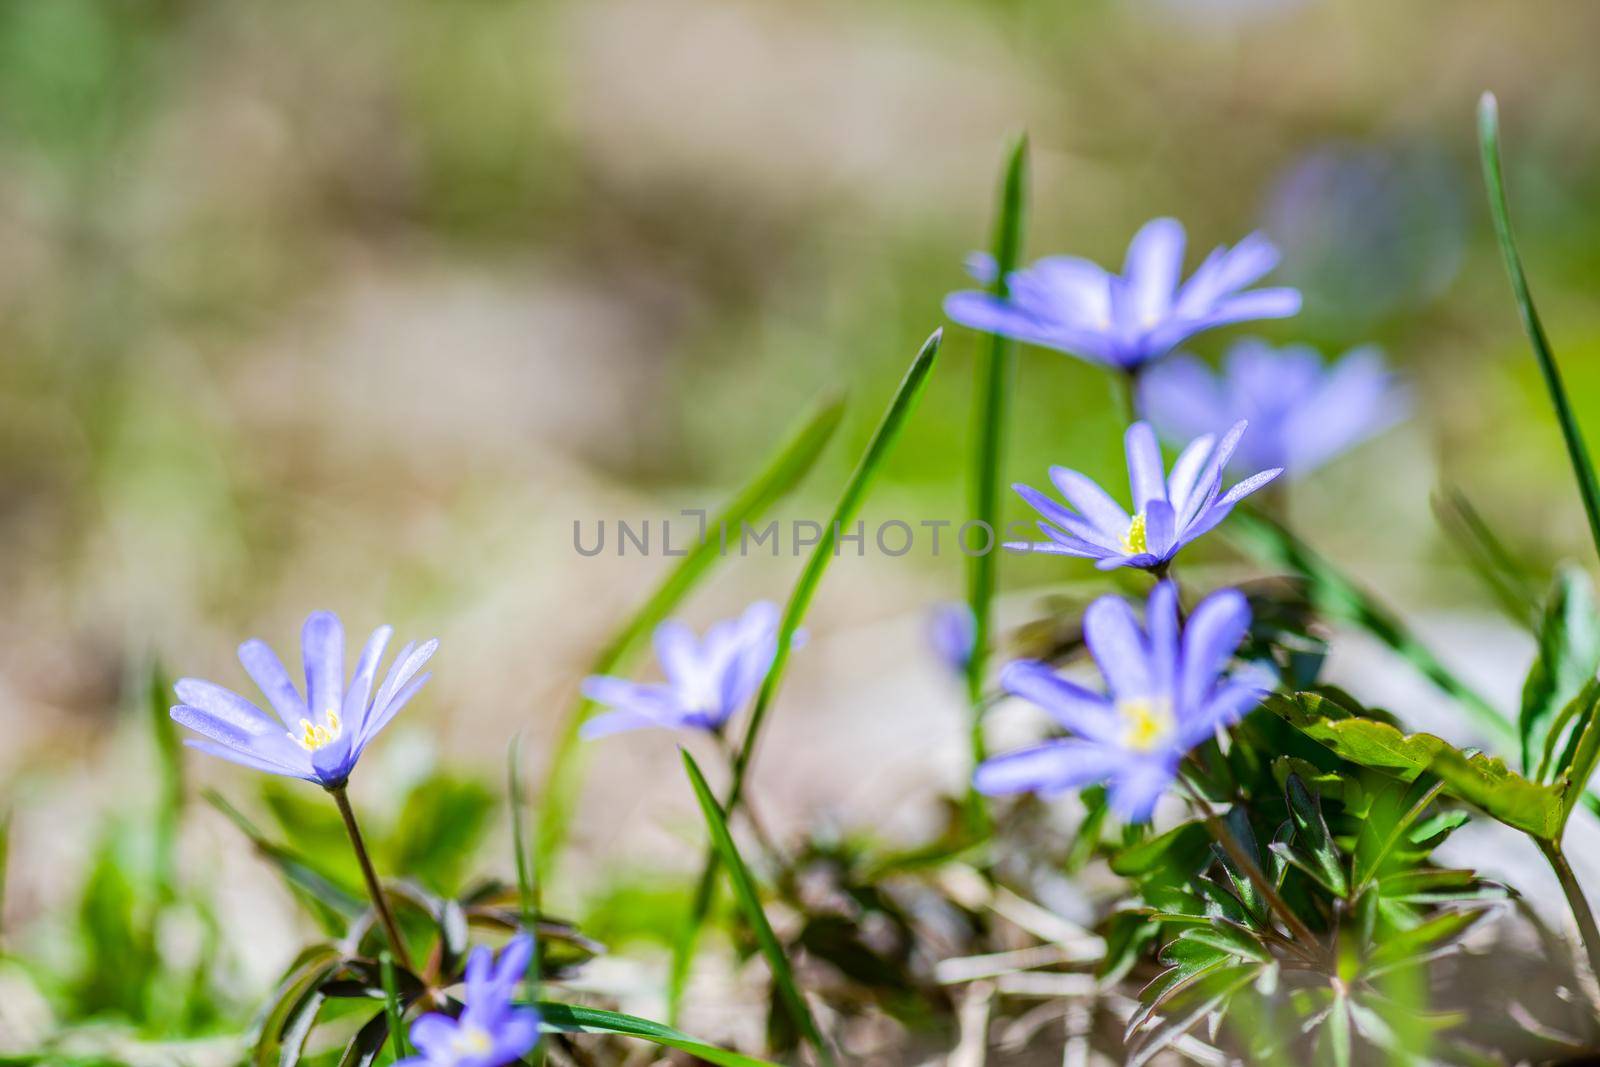 Anemone flowers in the forest meadow by Elet